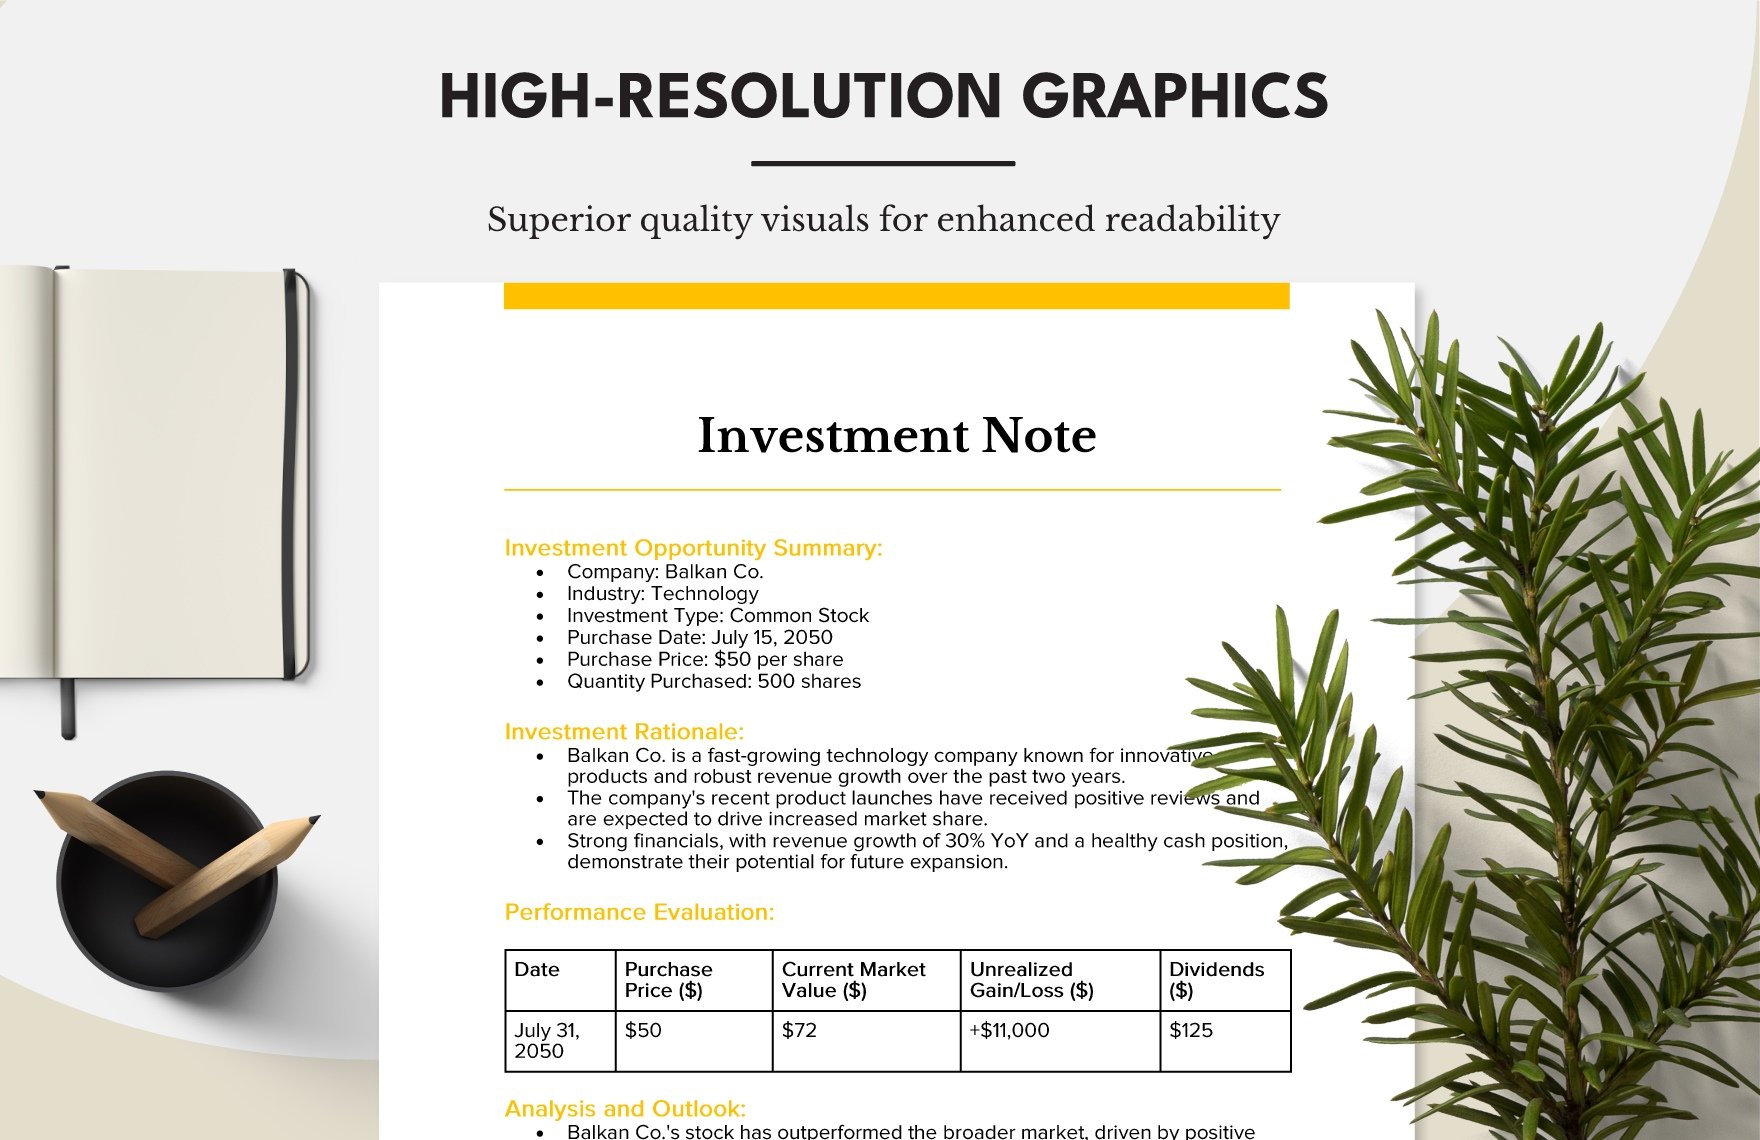 Investment Note Template